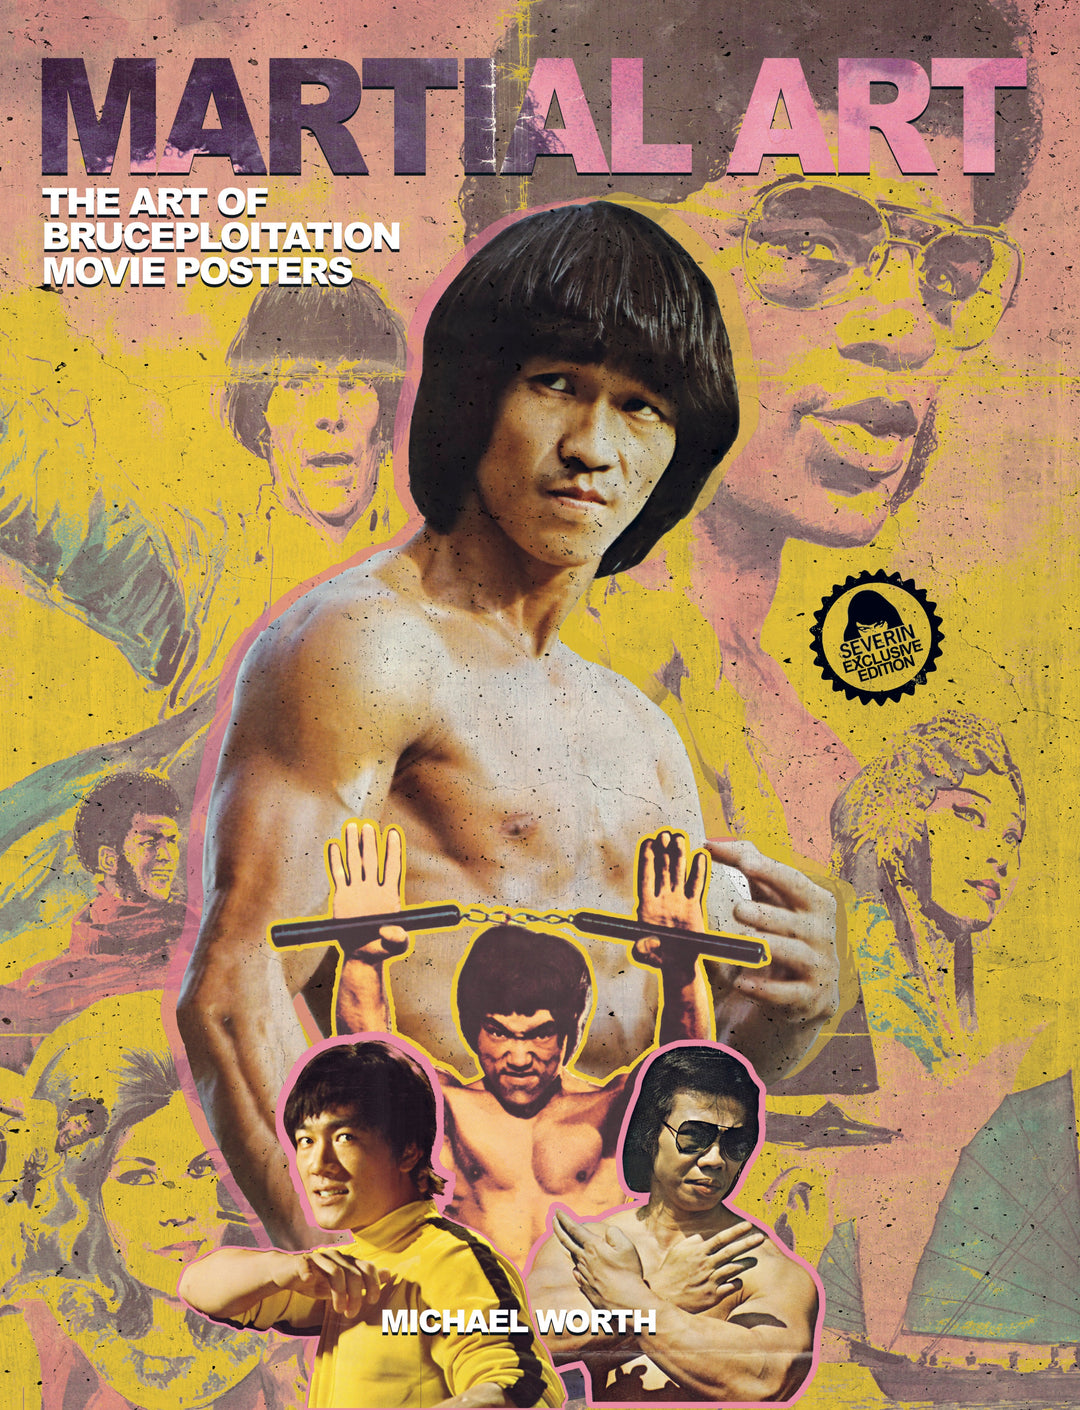 Martial Art - The Art Of Bruceploitation Movie Posters [Book] [Limit of 100] PRE-ORDER